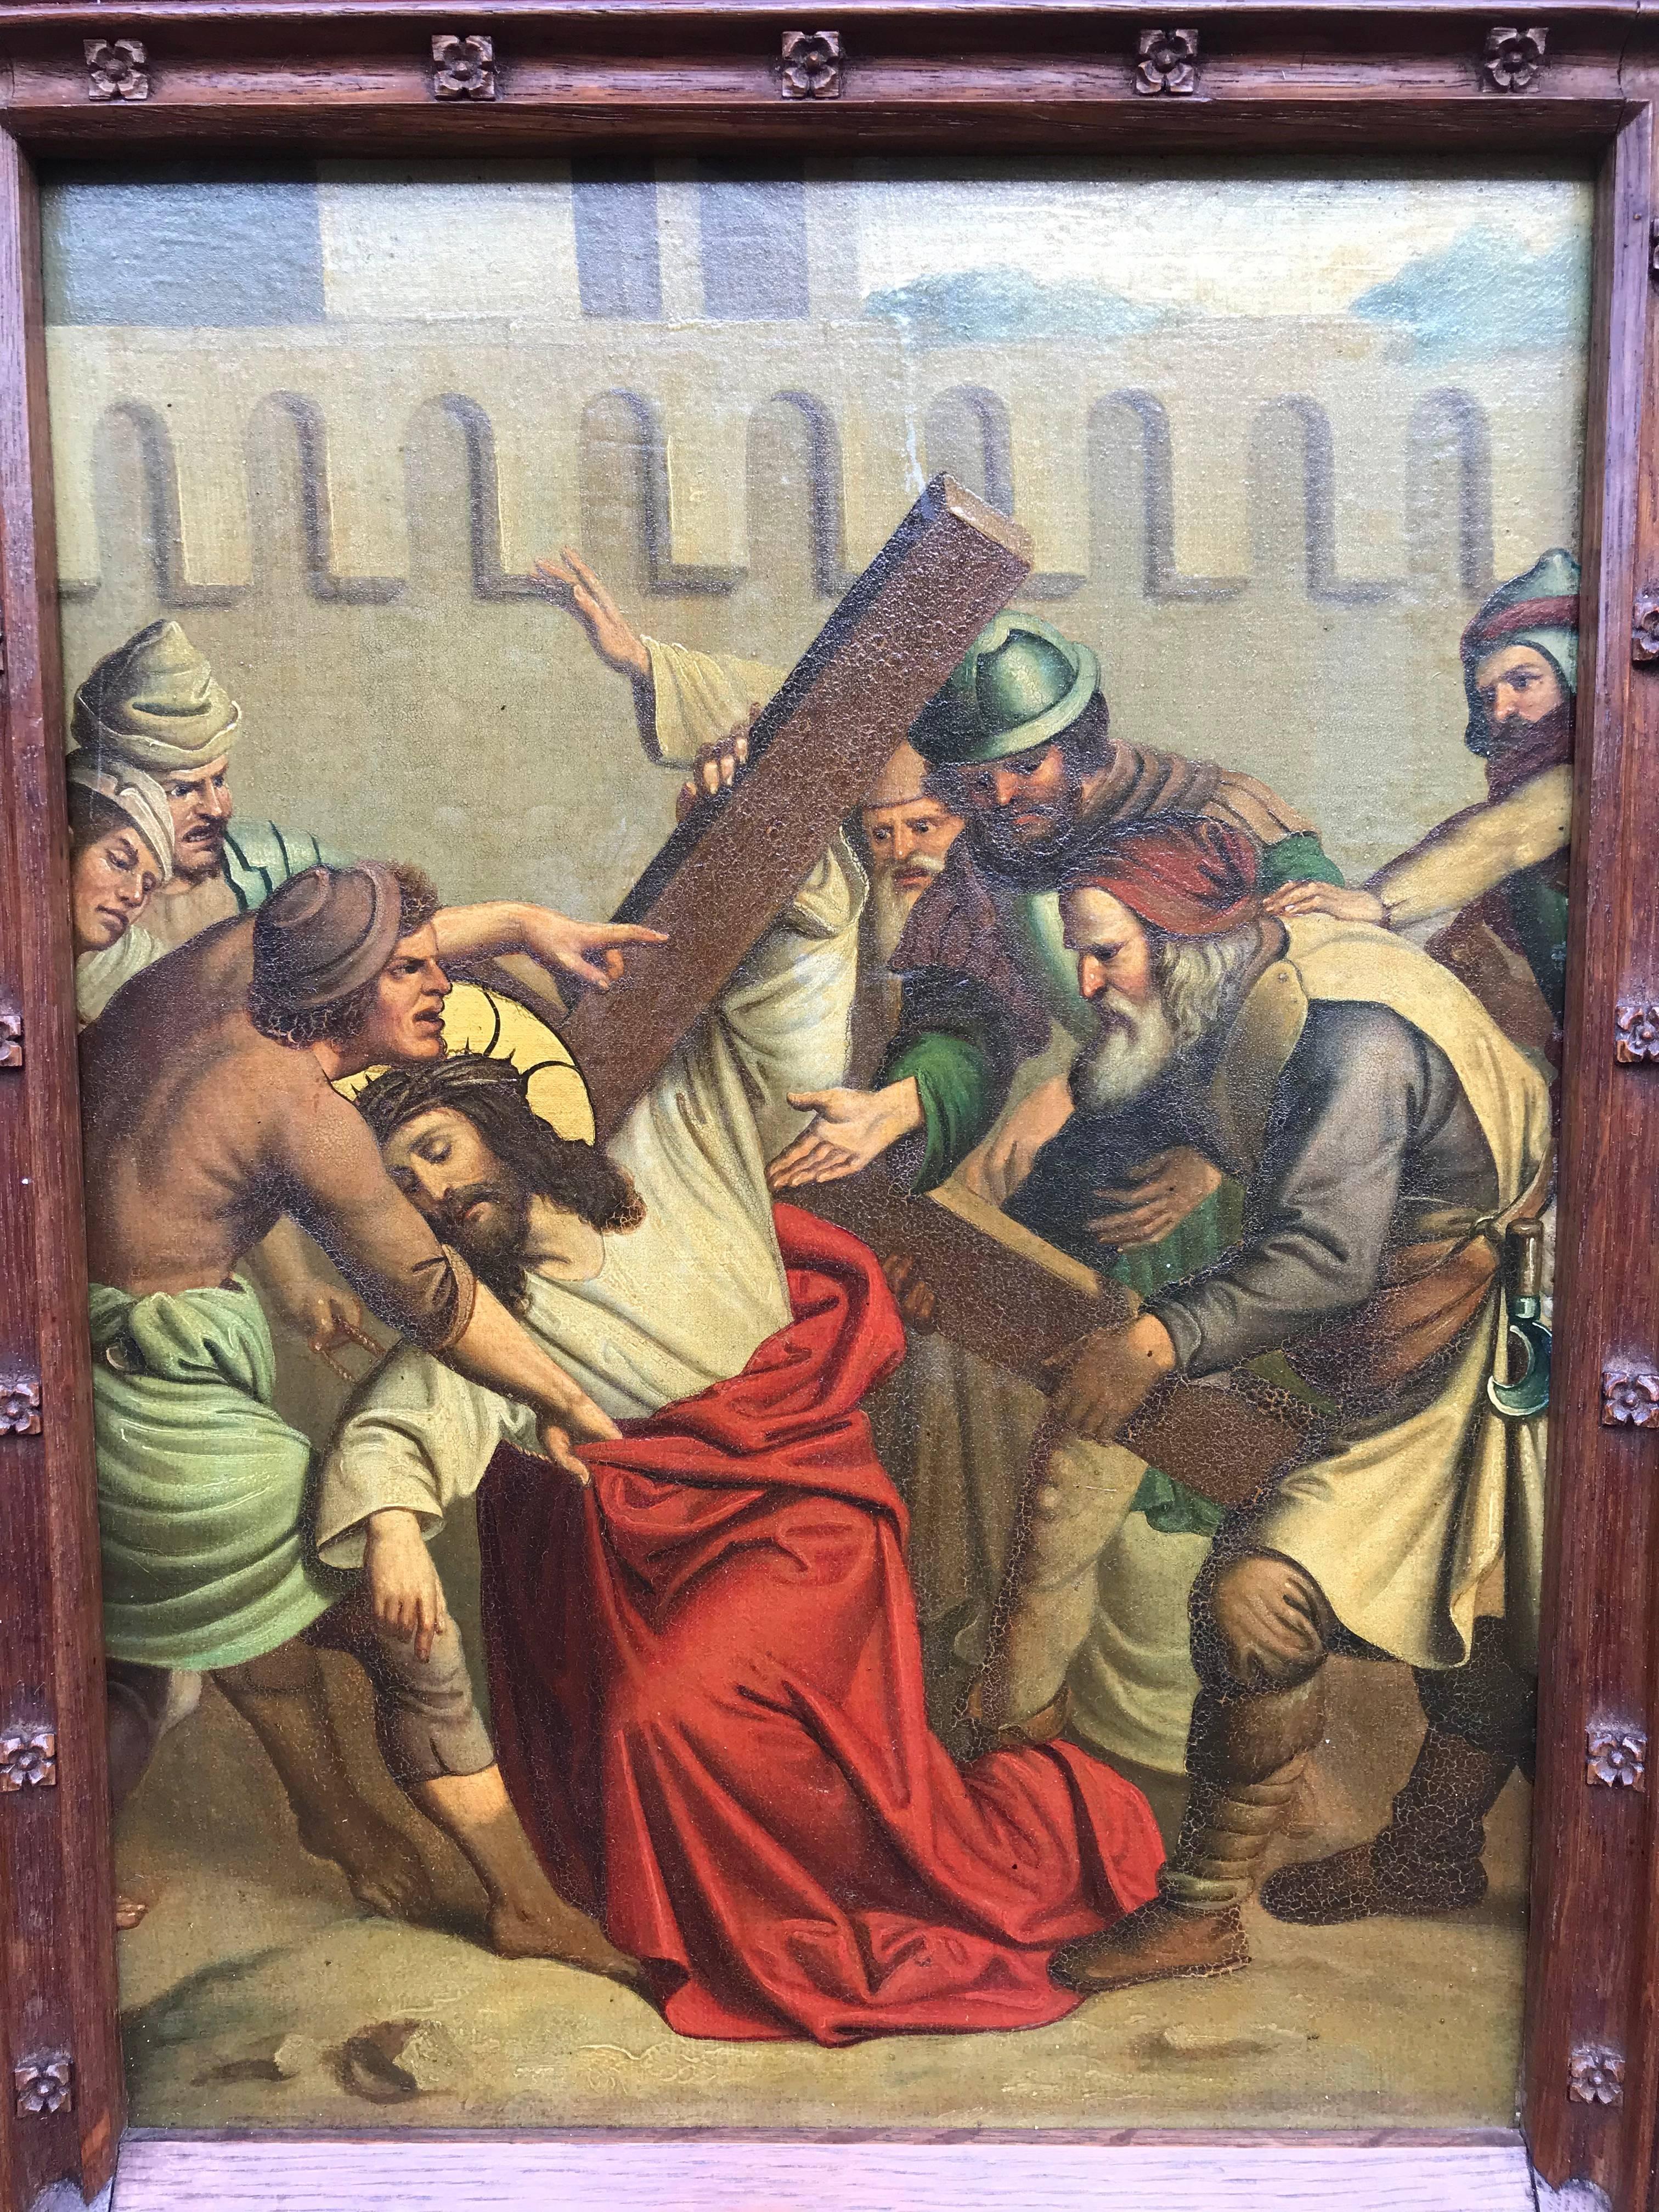 Another stunning work of religious art. 

This polychrome painting on metal depicts, Simon of Cyrene helping Jesus to carry the cross. All kinds of human emotions can be read from the faces of the different figures in this impressive painting. It is